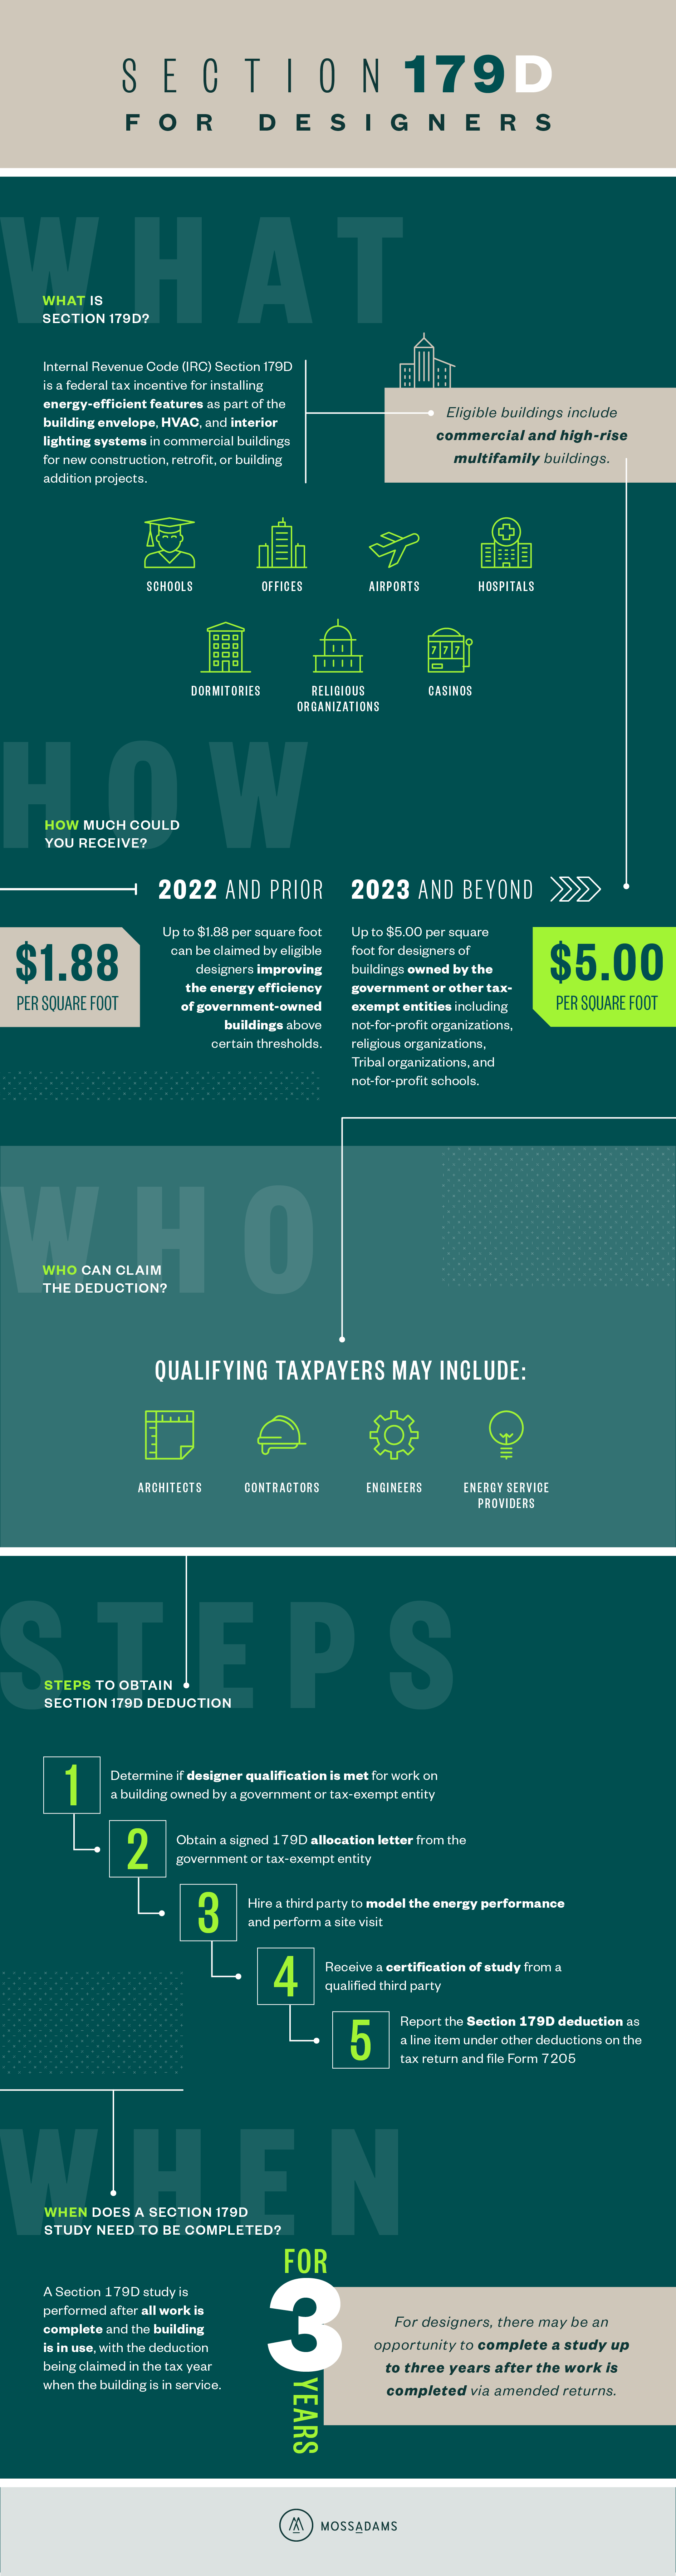 A Section 179D infographic that details what the incentive is, eligible buildings, qualifying taxpayers, and steps to obtain it